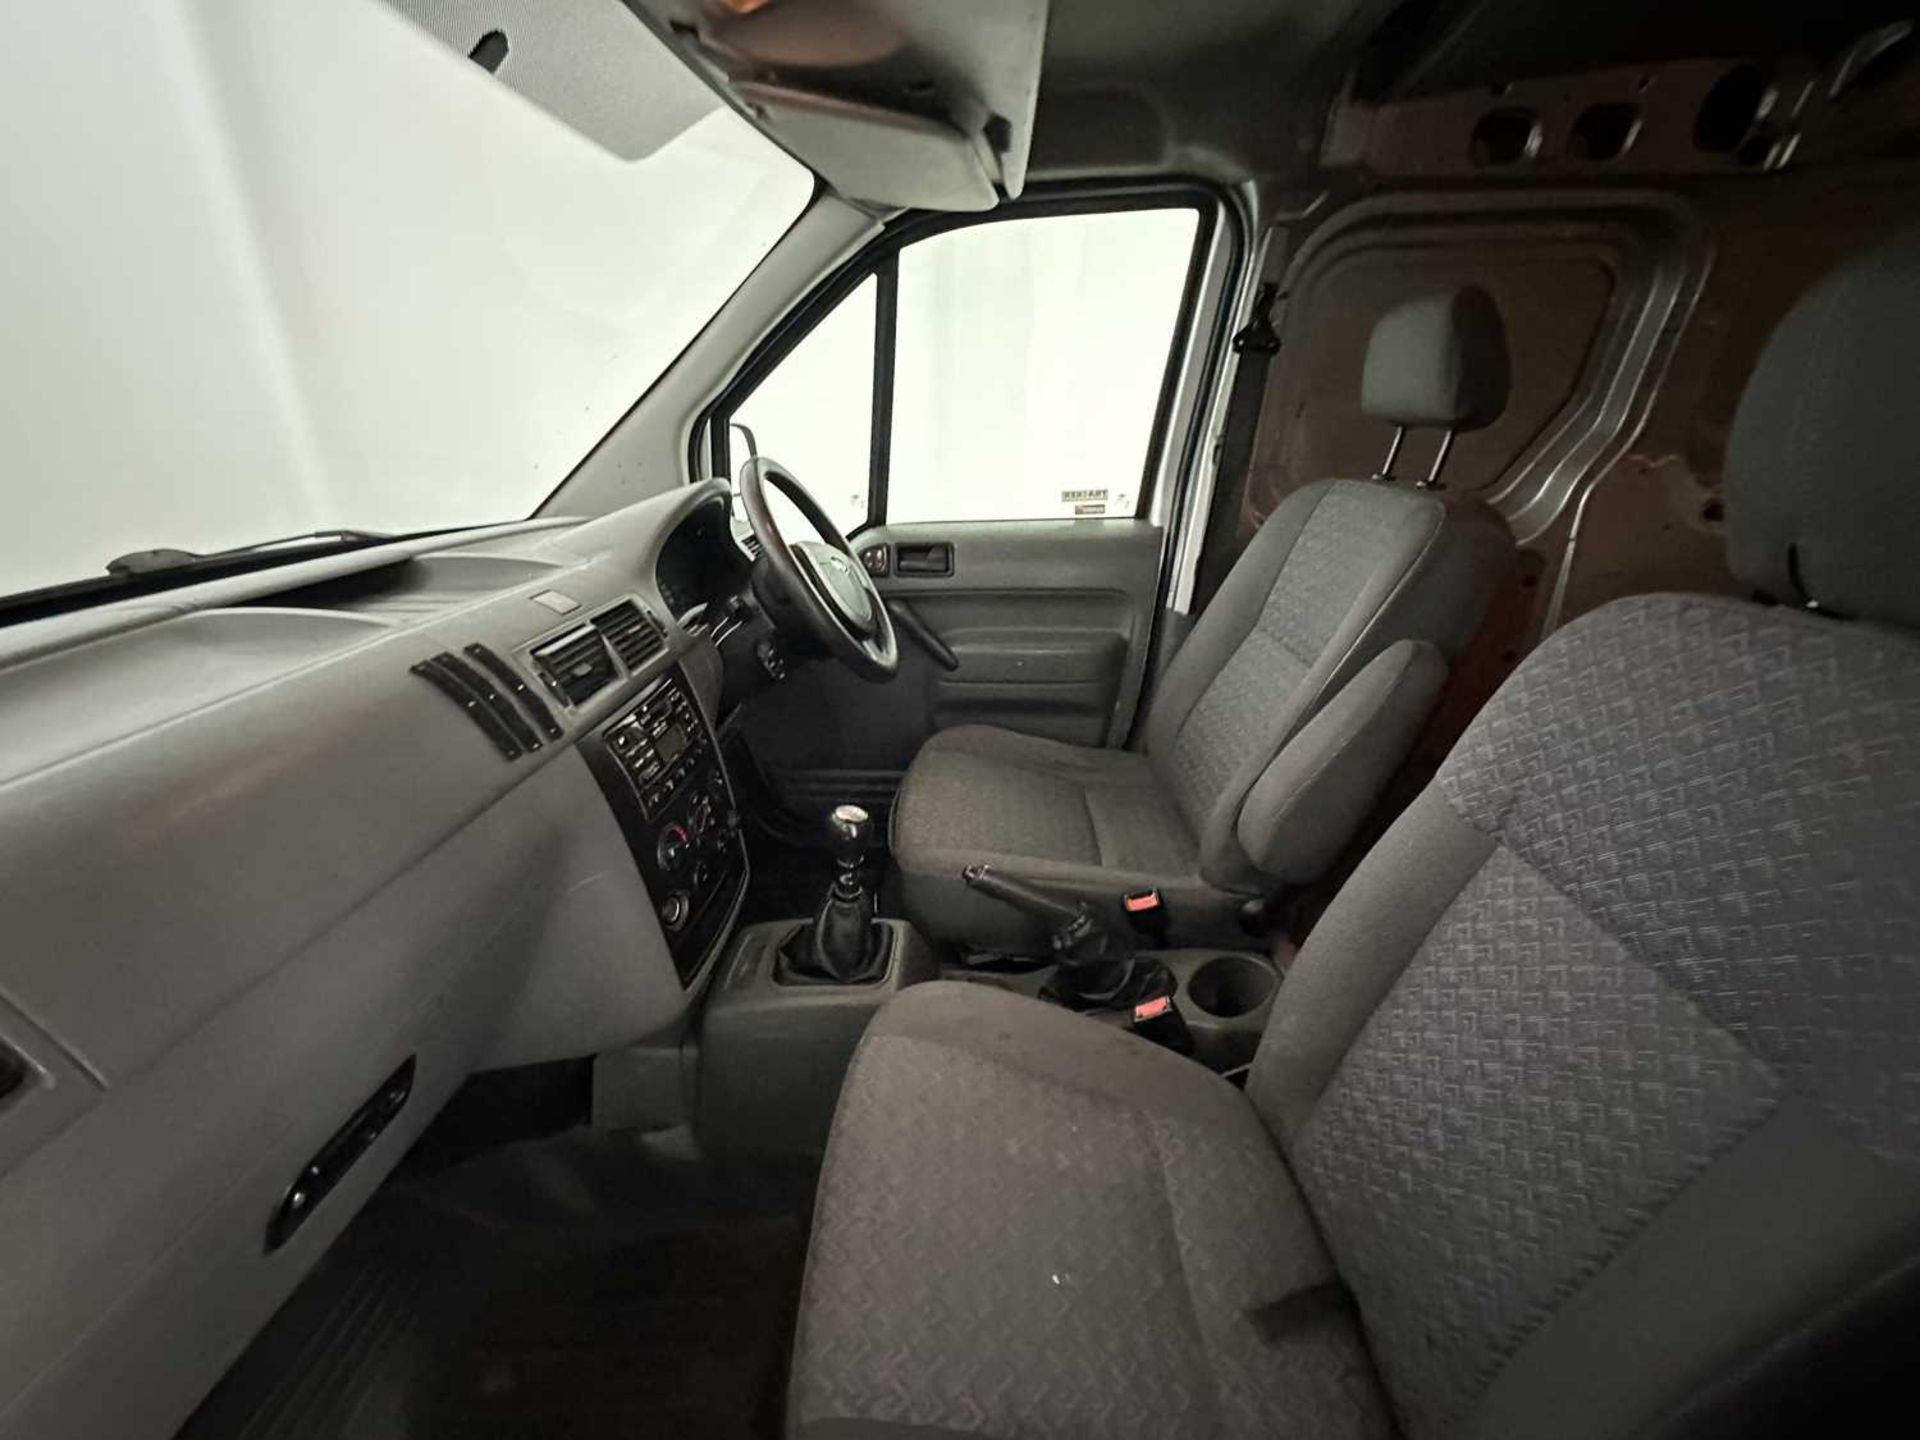 2003 Ford Transit Connect - Image 21 of 30